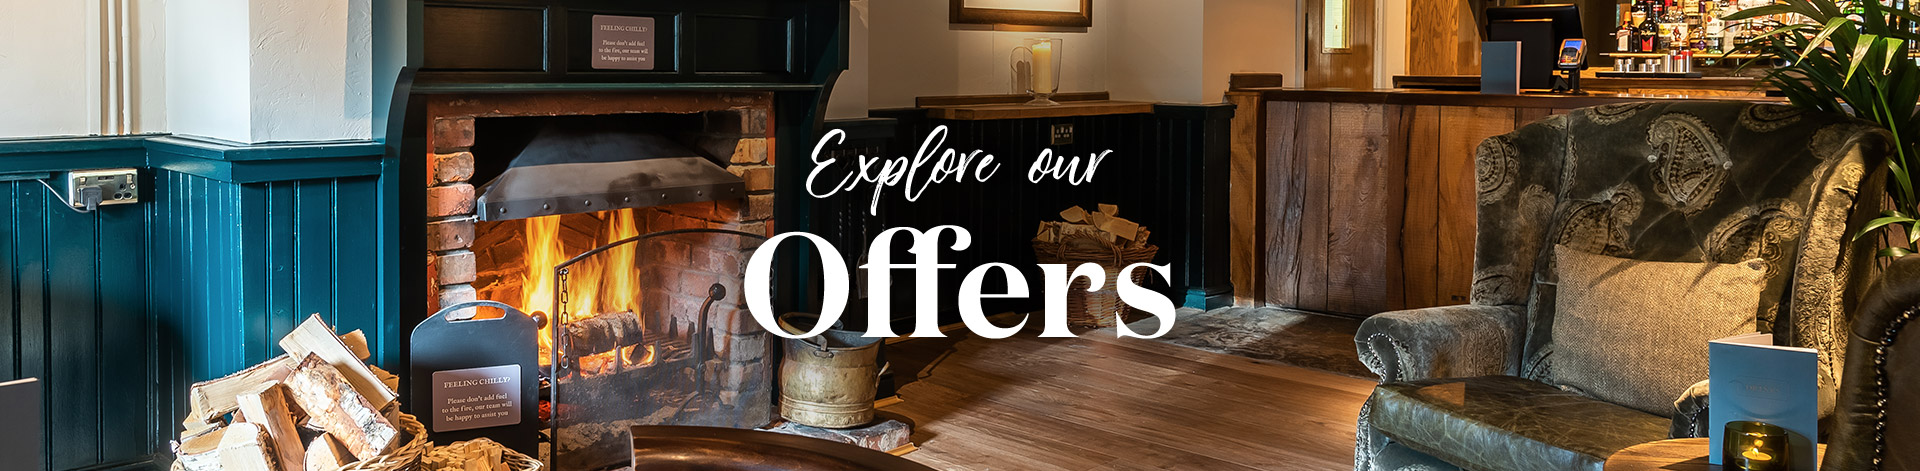 Our latest offers at The Crown, Bransgore